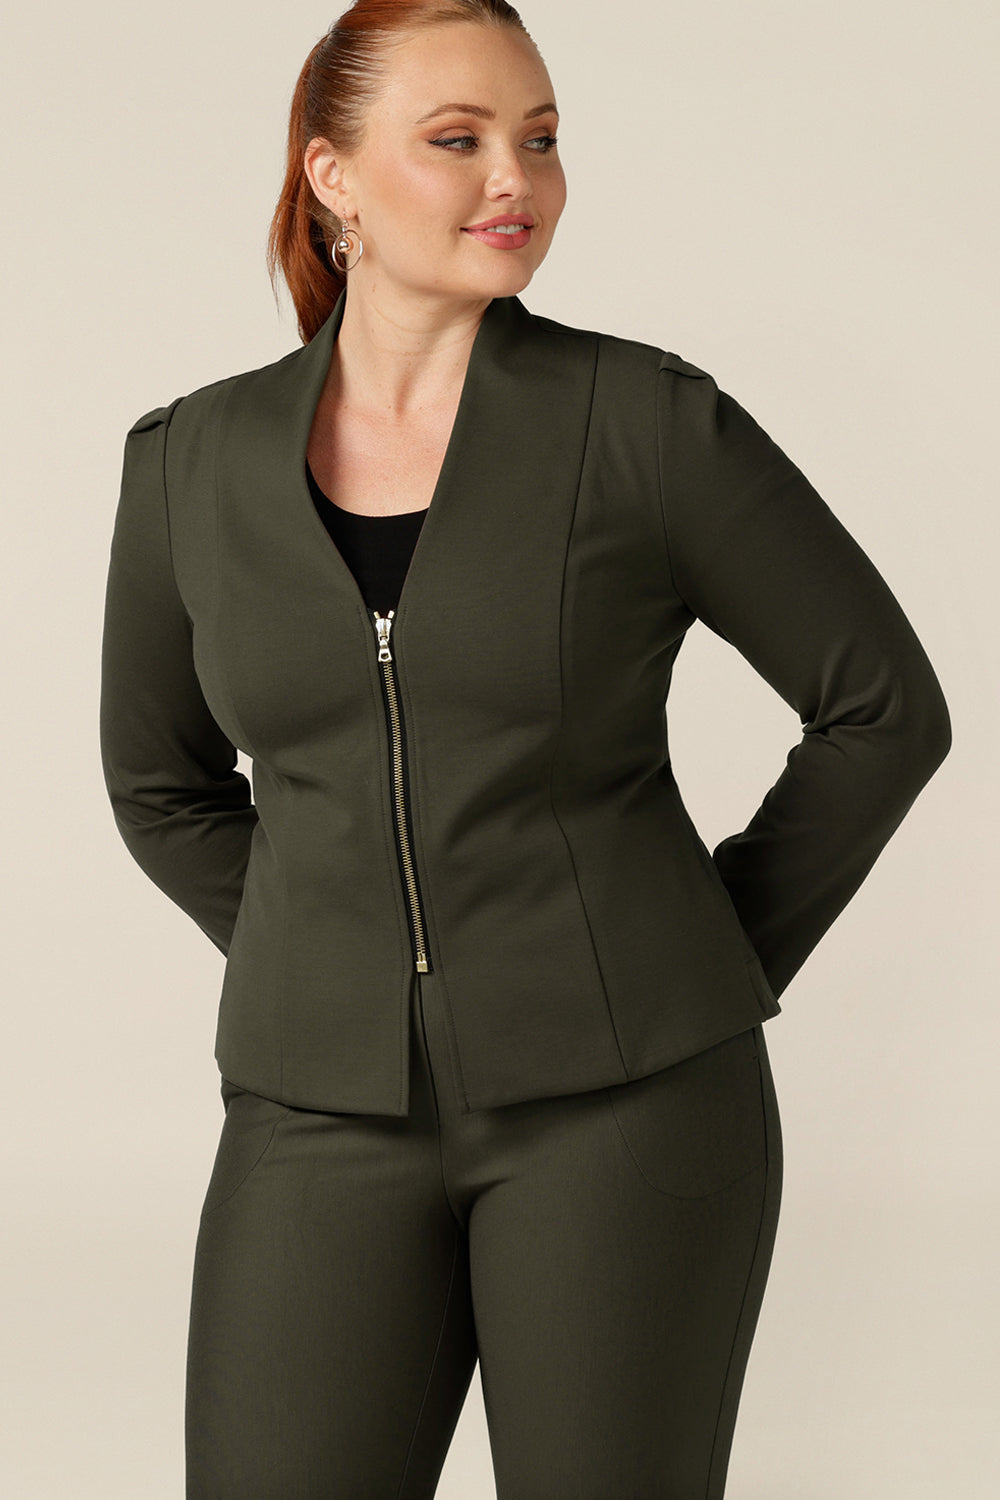 A size 12, curvy woman wears a tailored jacket with collarless V-neckline and zip fastening. Australian-made in olive green ponte jersey, the stretch fabric makes for a comfortable corporate jacket.